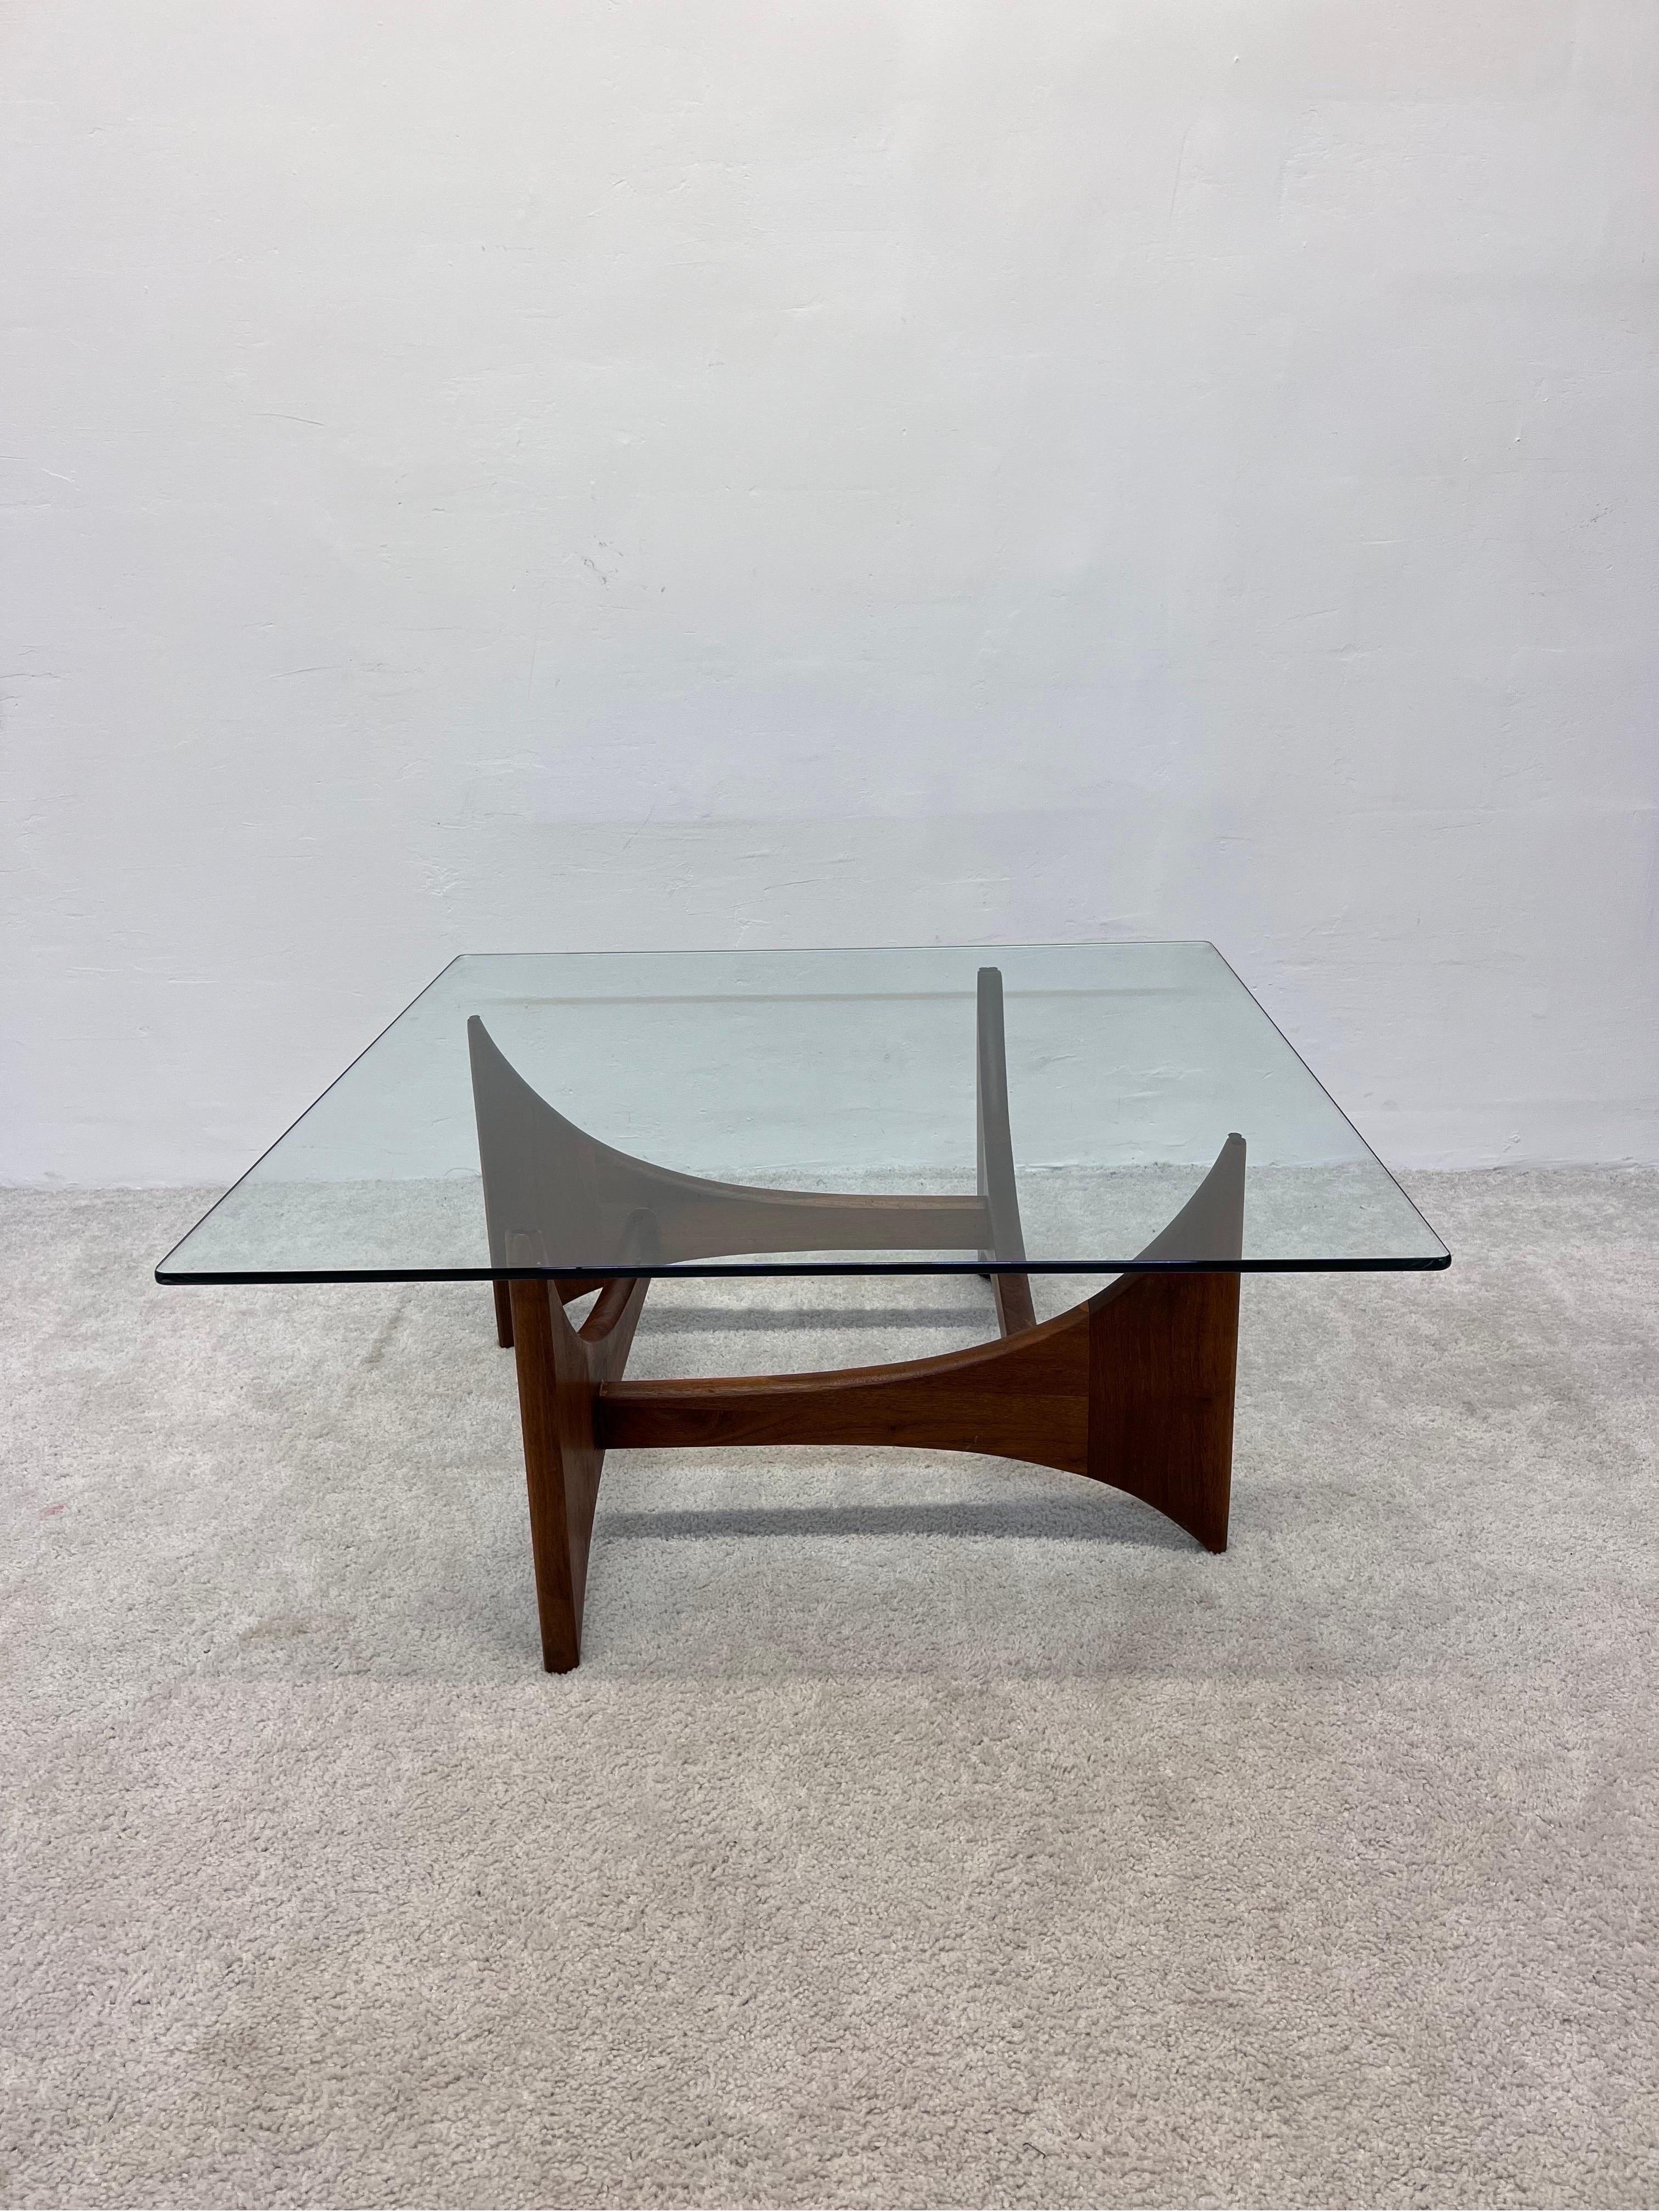 Sculptural walnut carved wood base with pencil edge glass top coffee or cocktail table by Adrian Pearsall, 1970s.